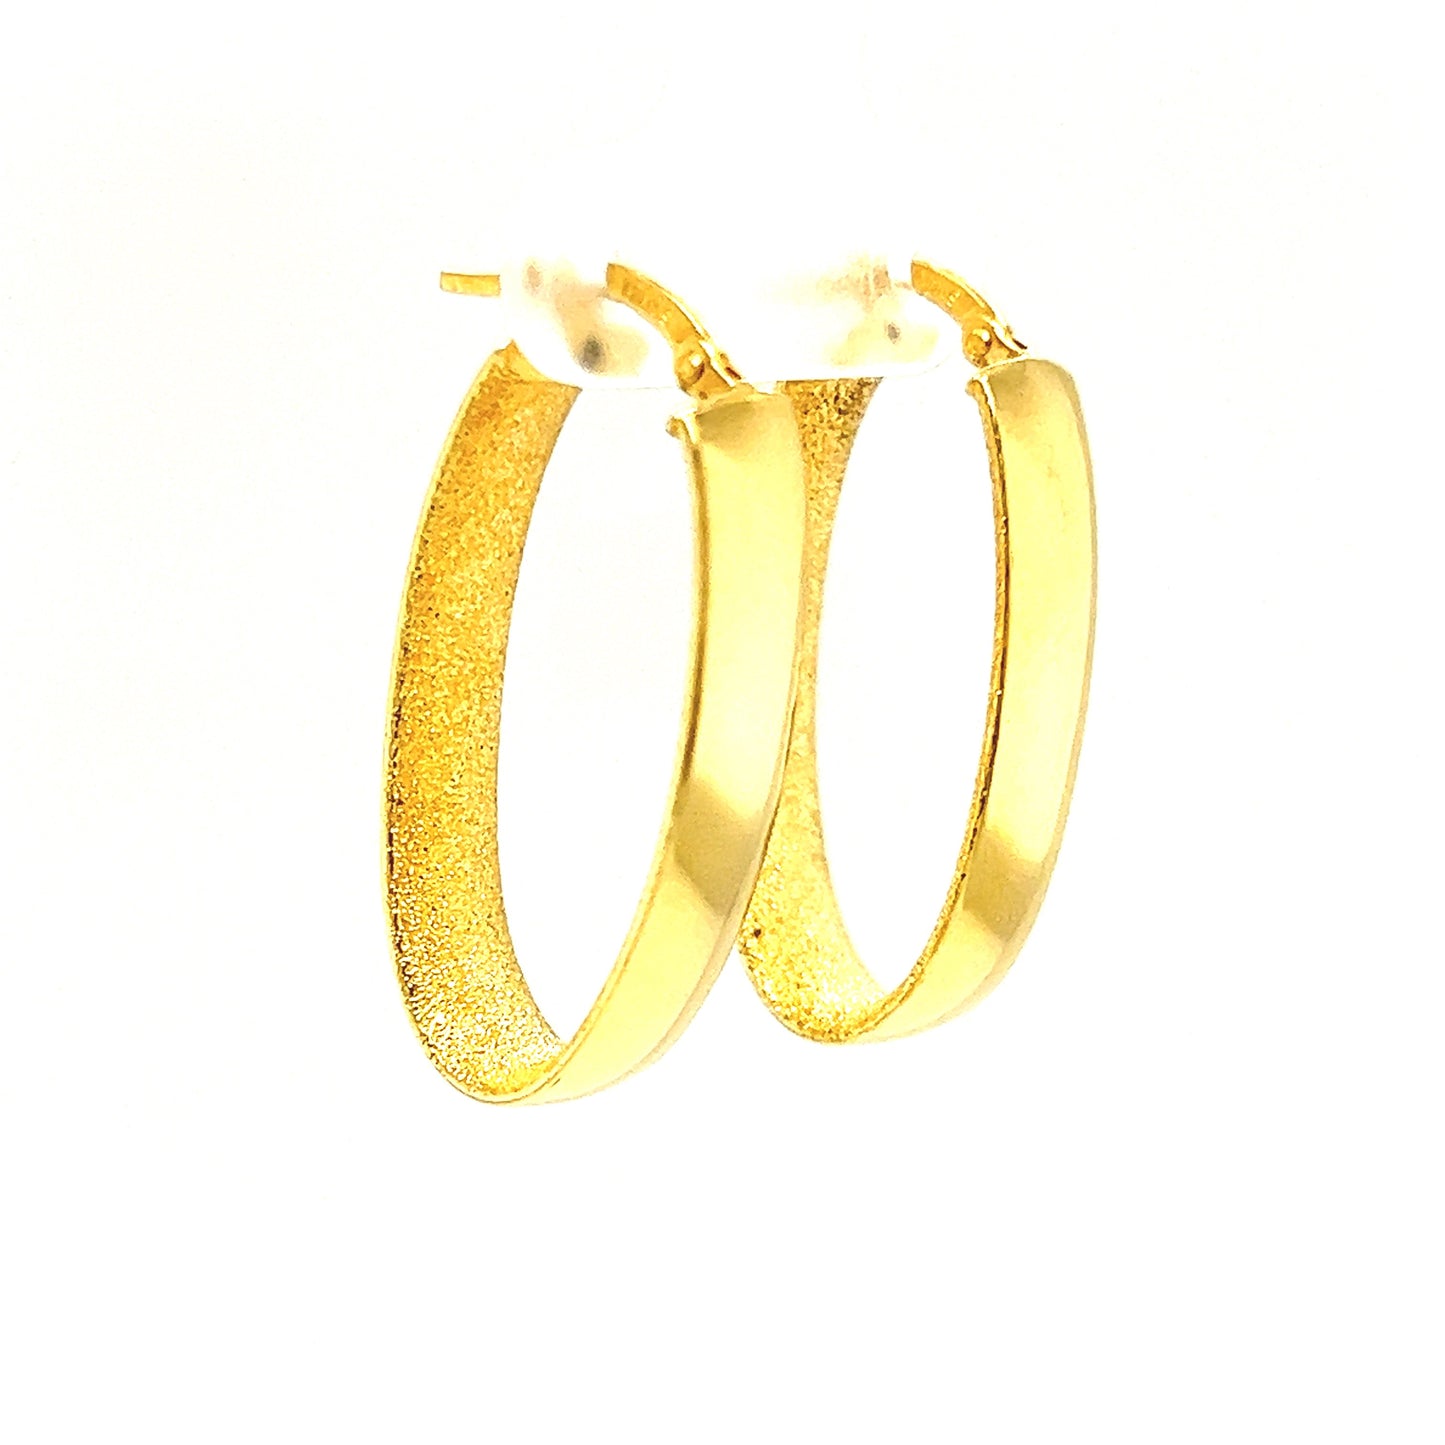 Oval Hoop 6mm Earrings with Star Dust Finish in 14K Yellow Gold Left Side View